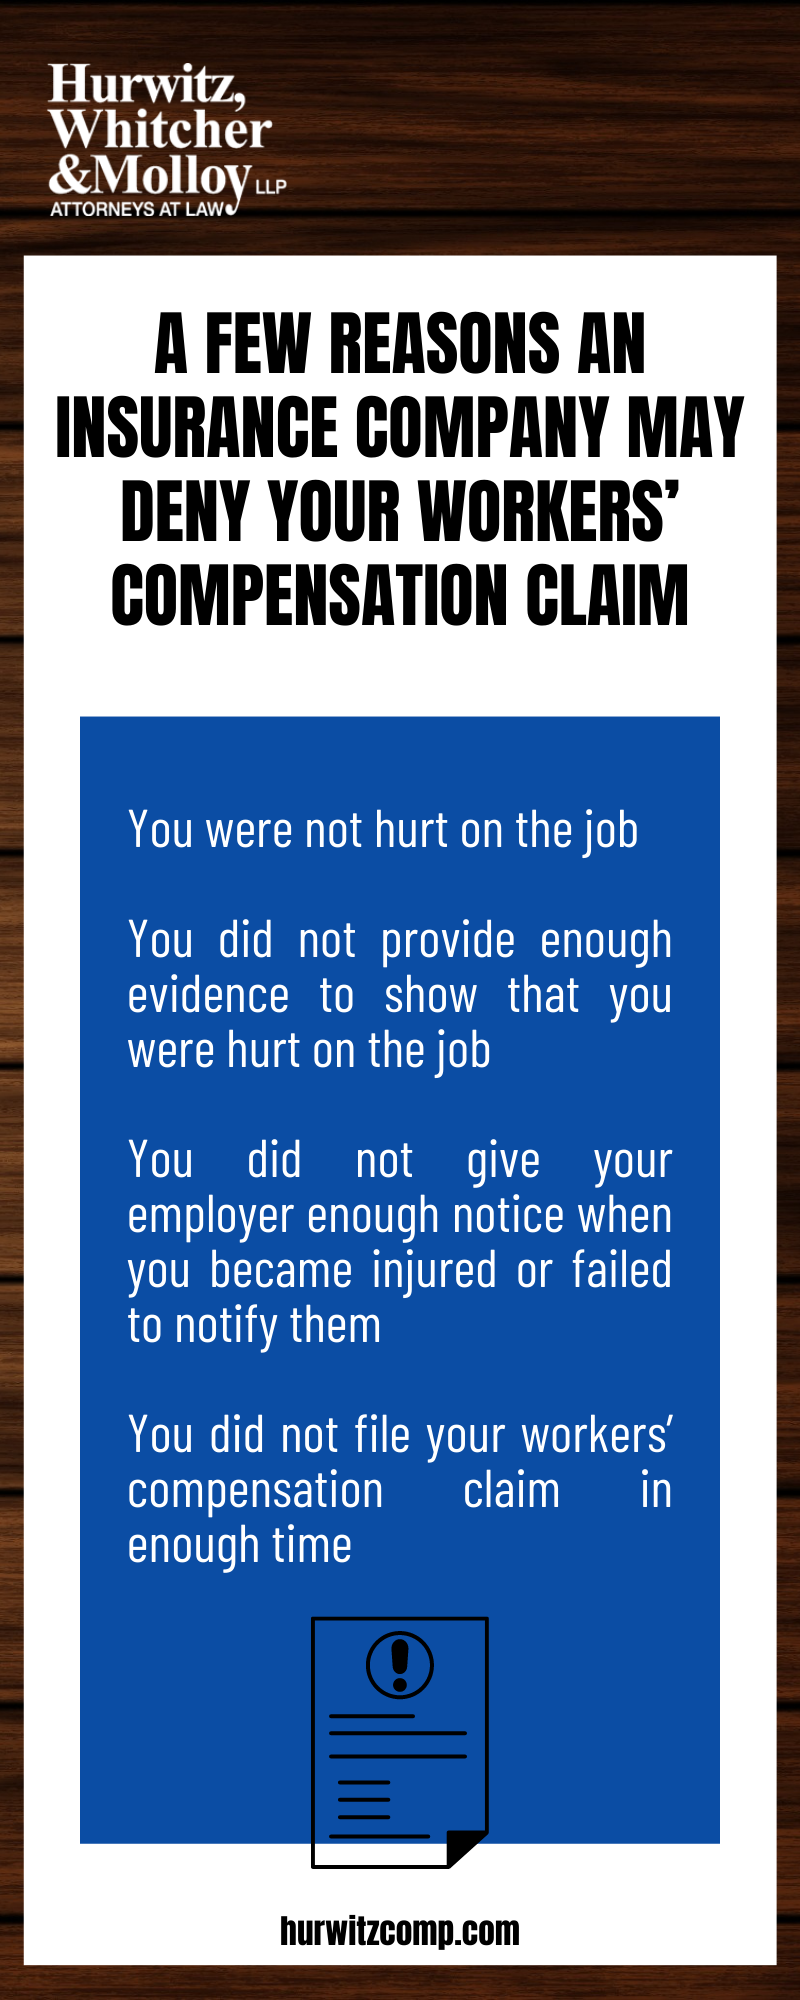 A FEW REASONS AN INSURANCE COMPANY MAY DENY YOUR WORKERS' COMPENSATION CLAIM INFOGRAPHIC